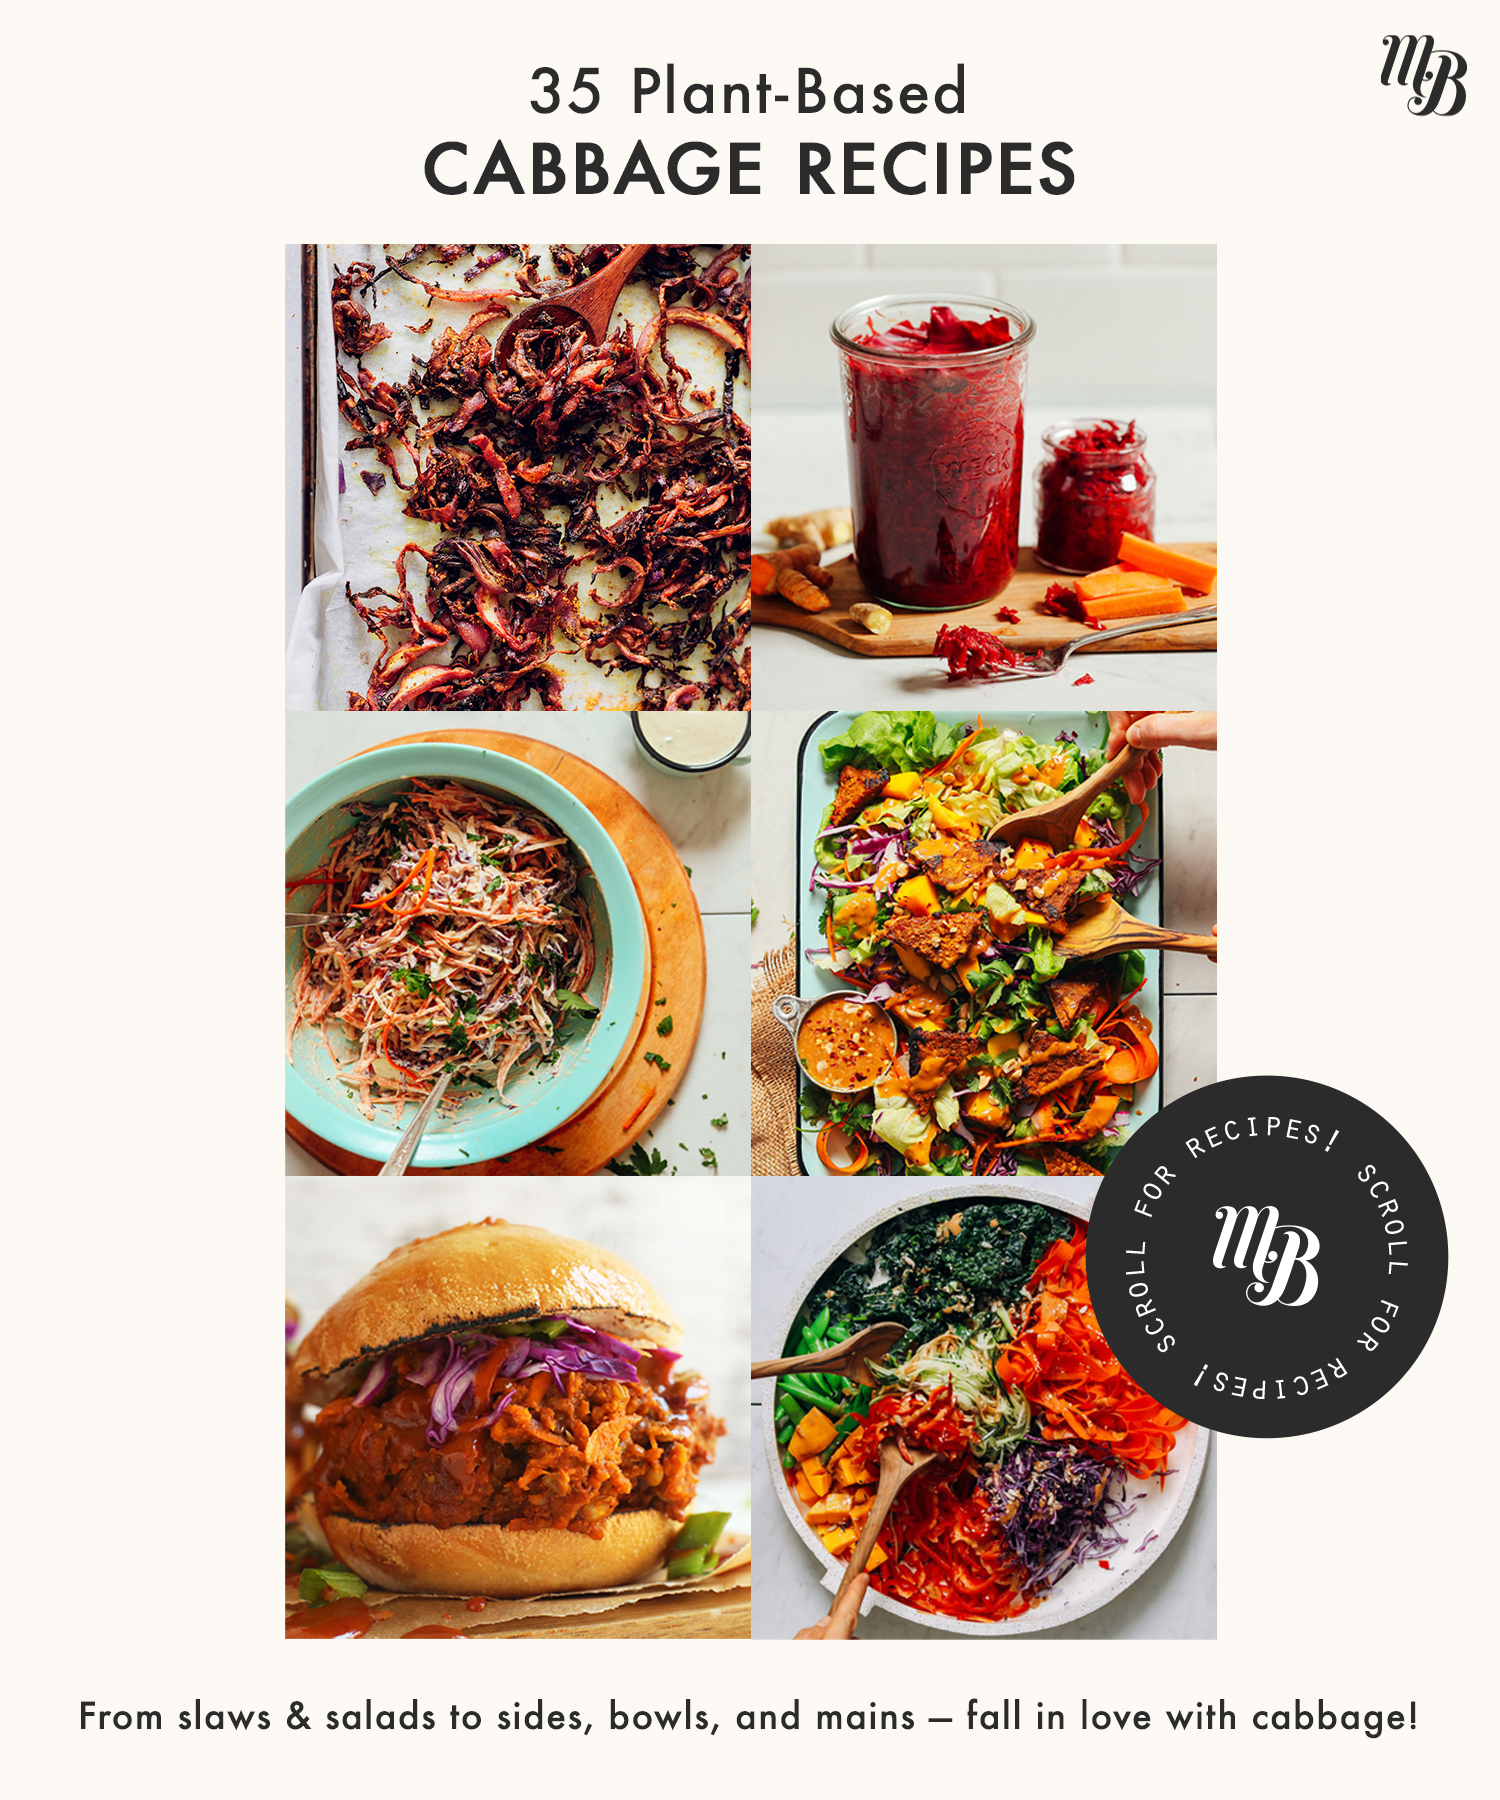 Roasted cabbage, sauerkraut, coleslaw, salad, and other cabbage recipes